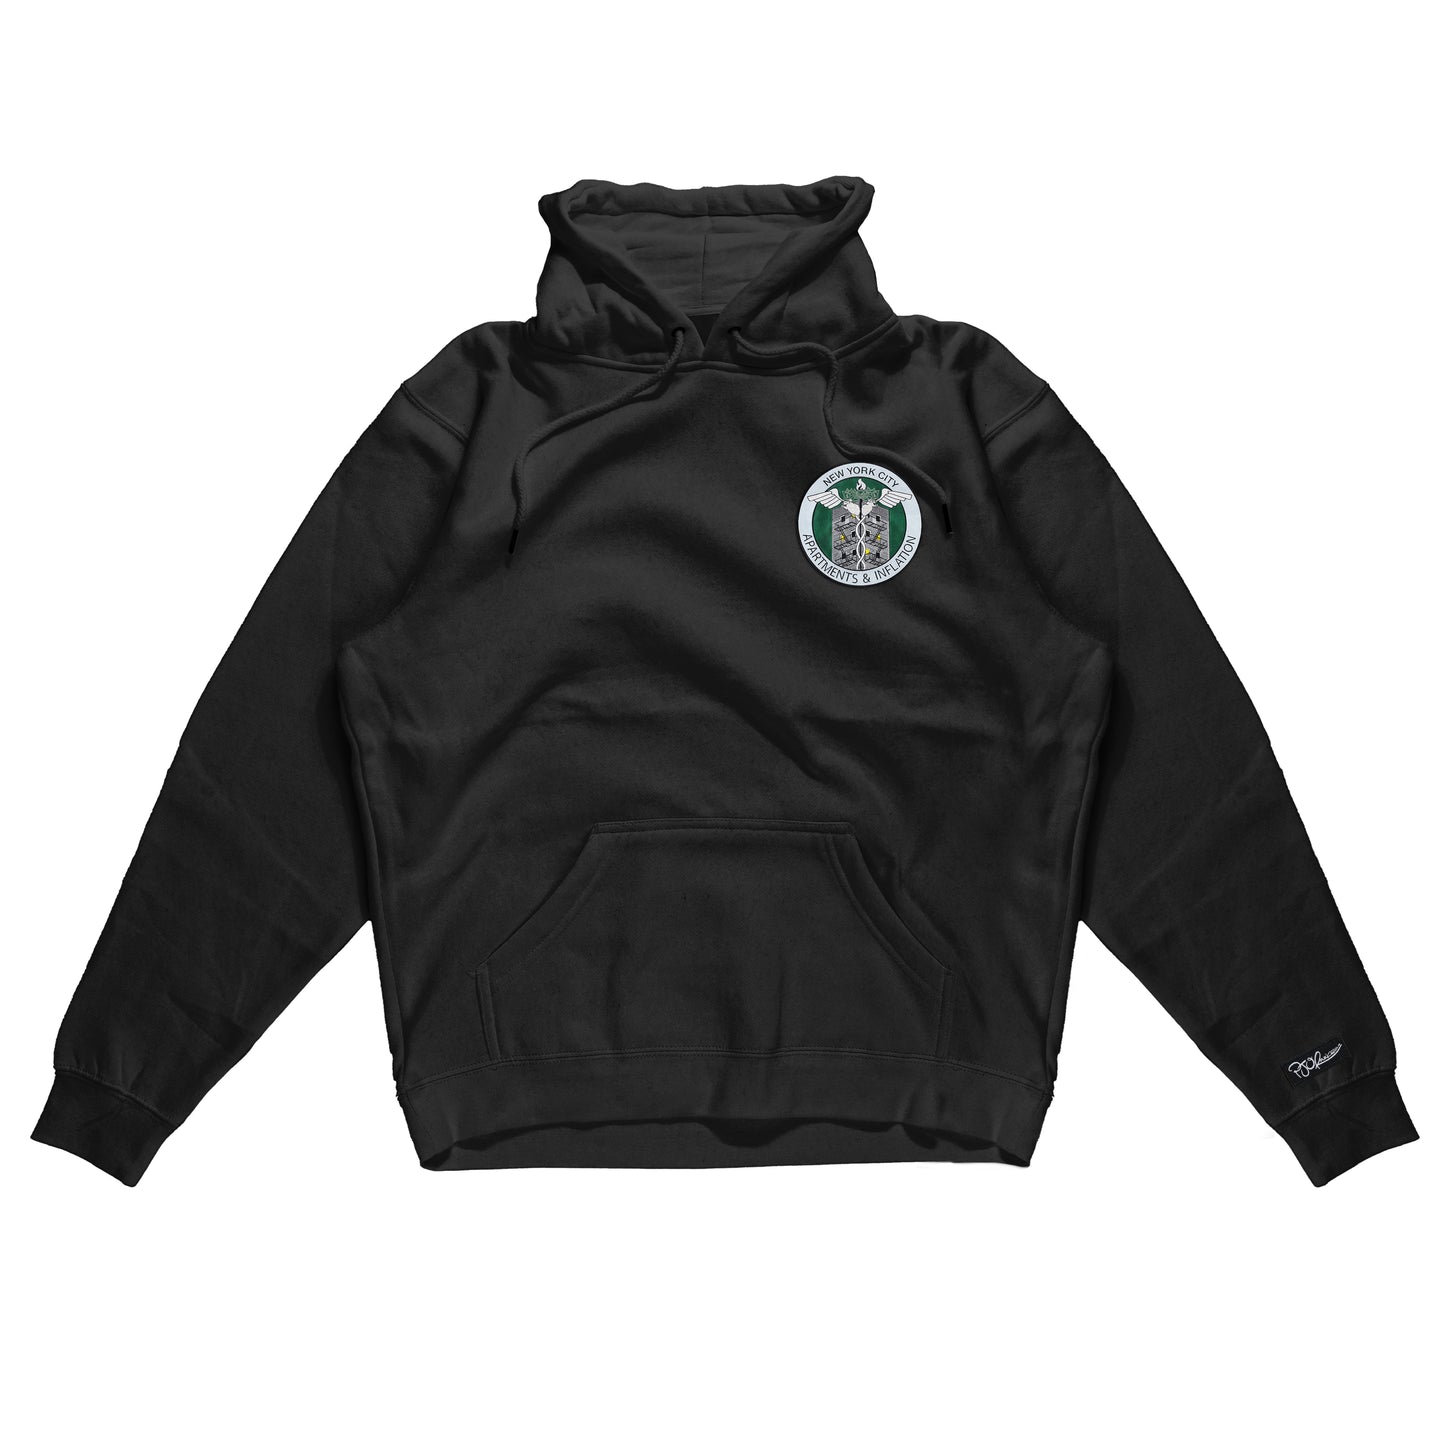 Apartments & Inflation Patch on Black Hoodie